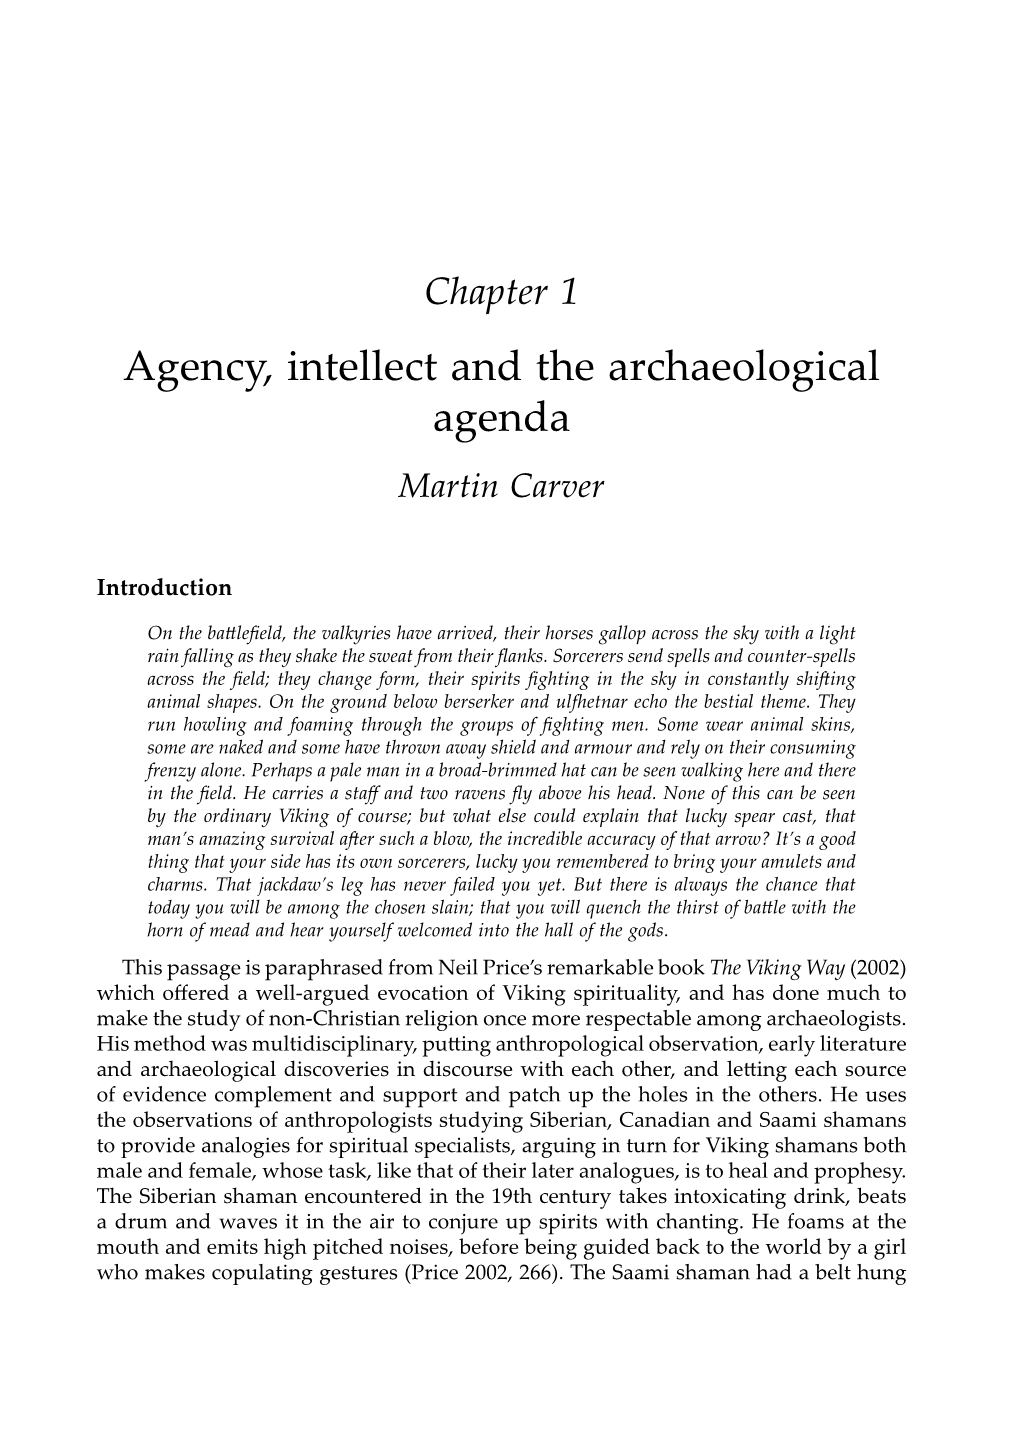 Agency, Intellect and the Archaeological Agenda Martin Carver